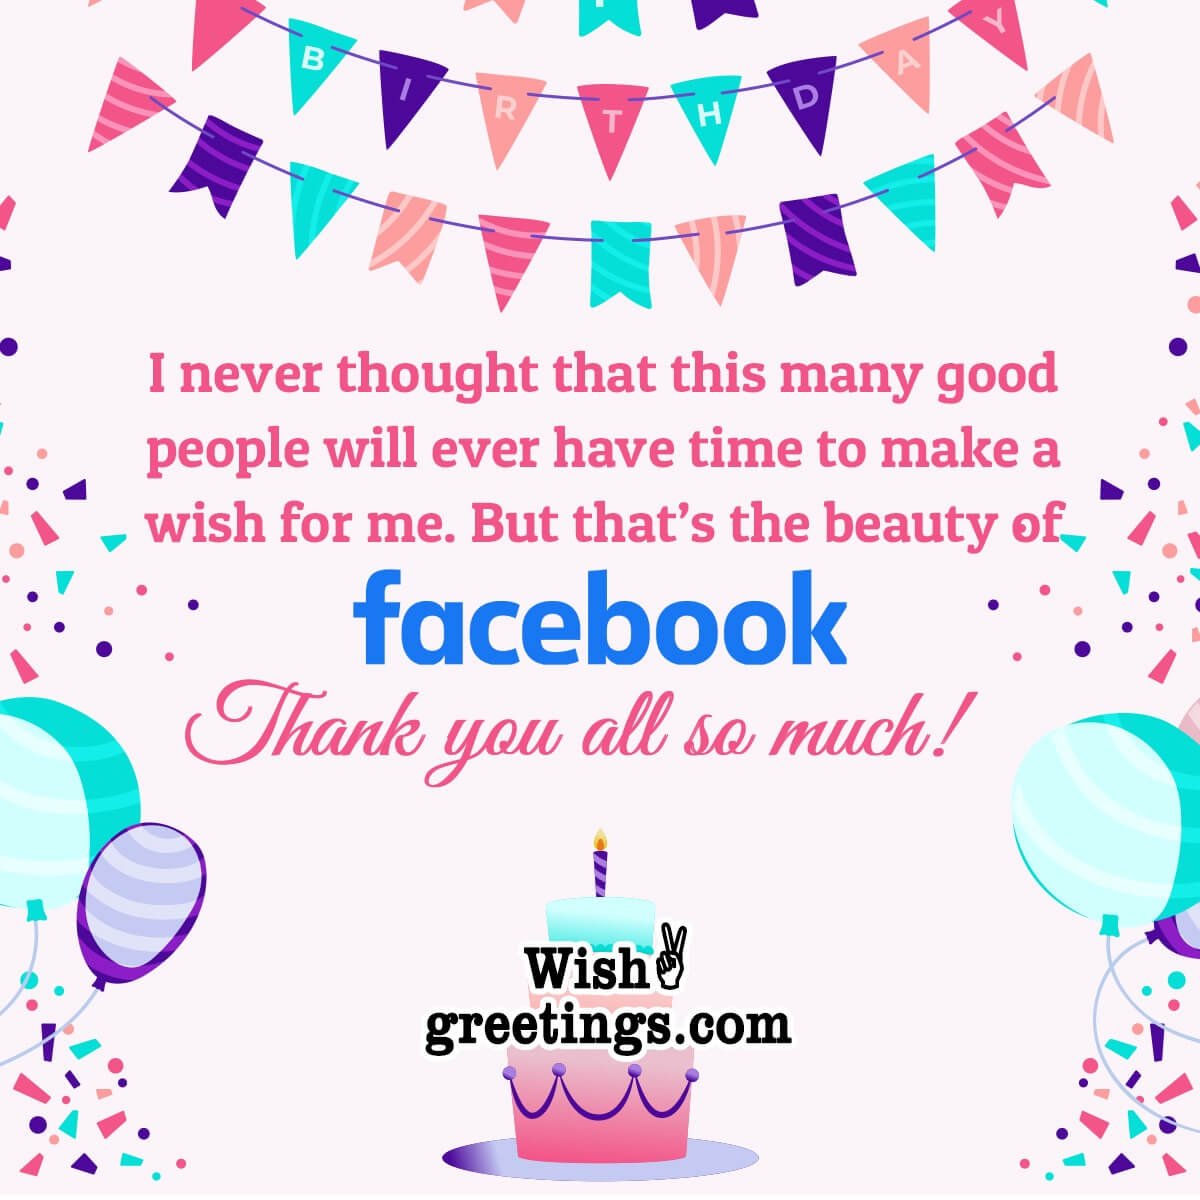 Thank You for Birthday Wishes on Facebook - Wish Greetings